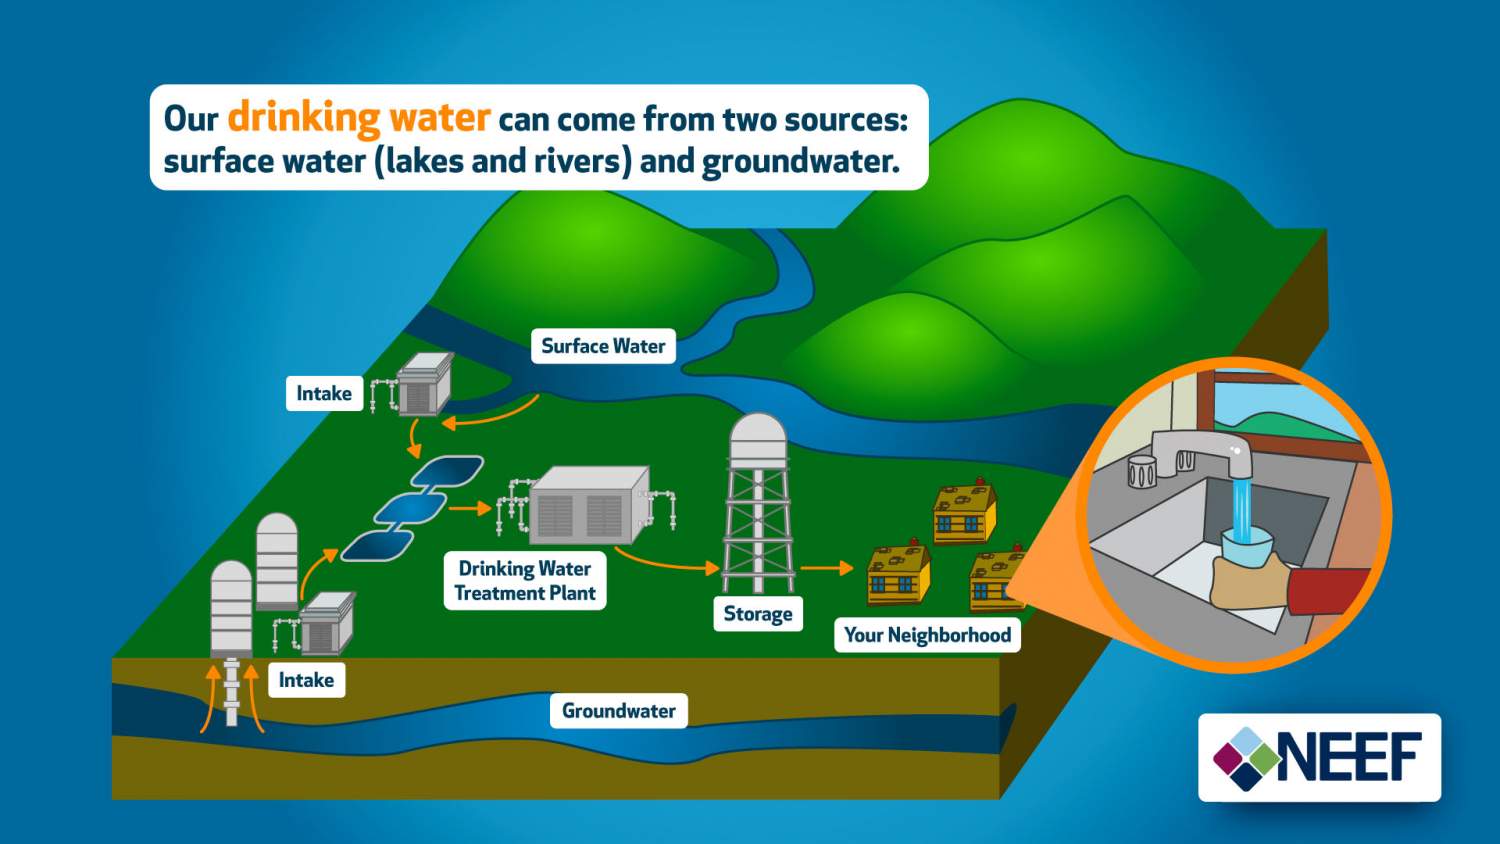 Our drinking water can come from two sources: surface water (lakes and rivers) and groundwater.